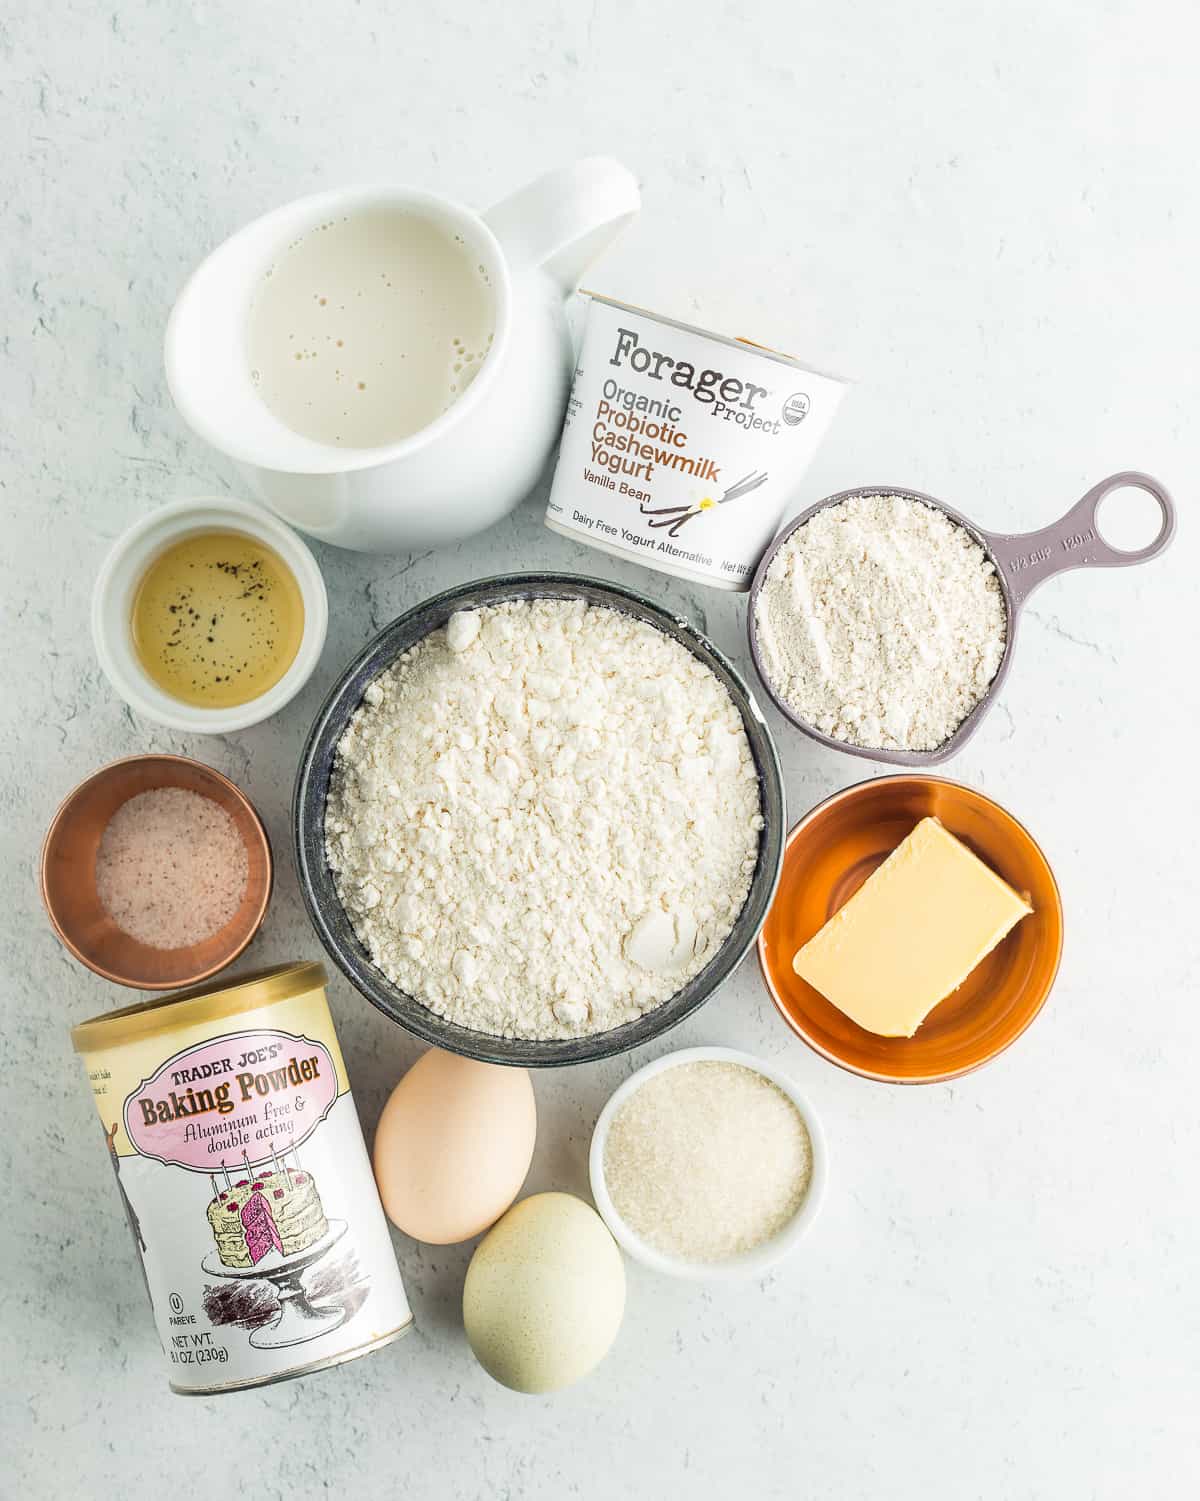 dairy-free yogurt, eggs, butter, flour, and other ingredients for making dairy-free pancakes